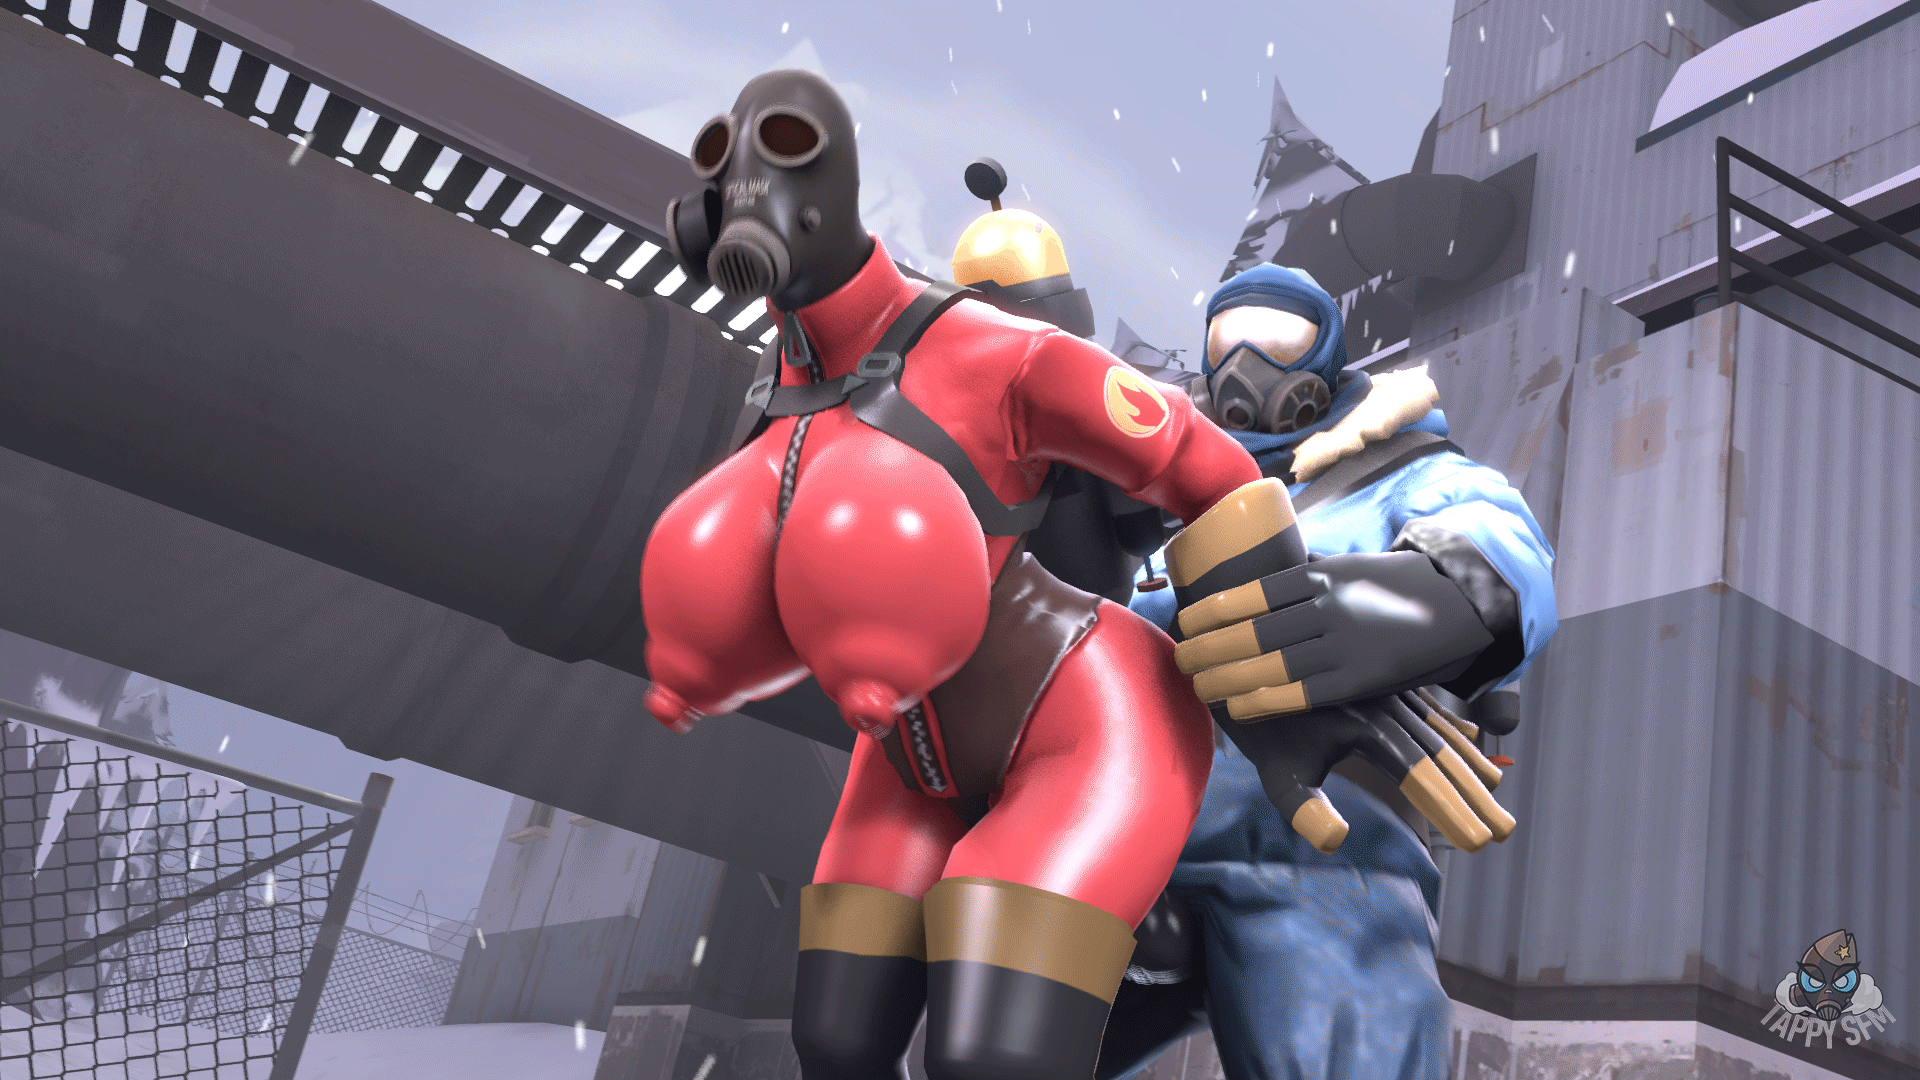 Rule 34 team fortress 2